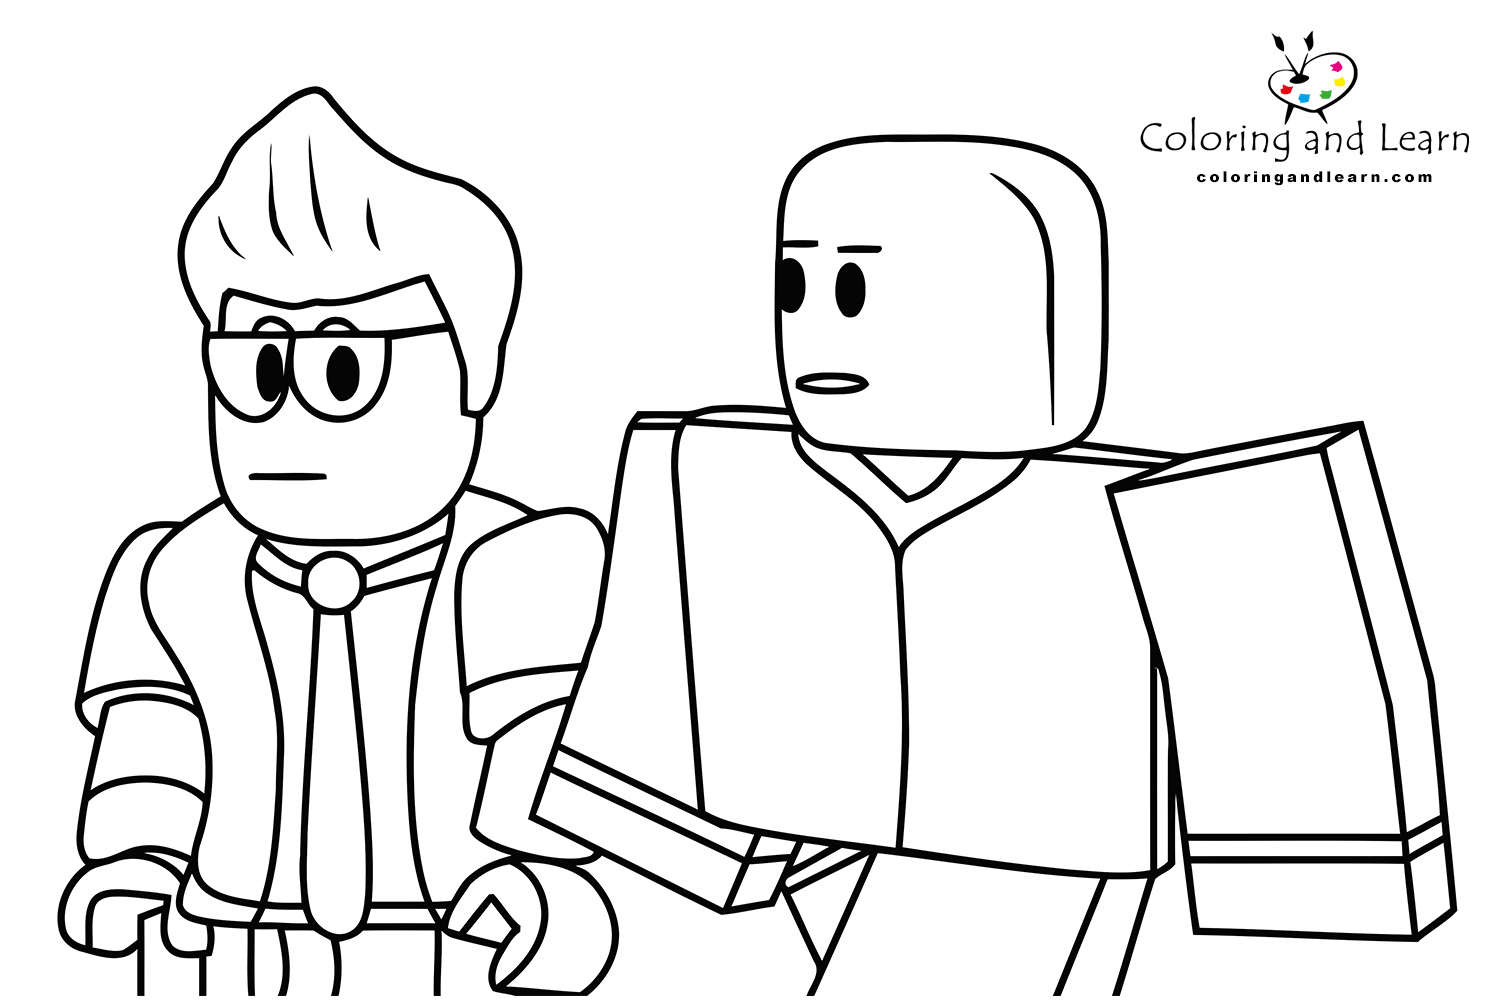 Pin em ROBLOX COLORING PAGES